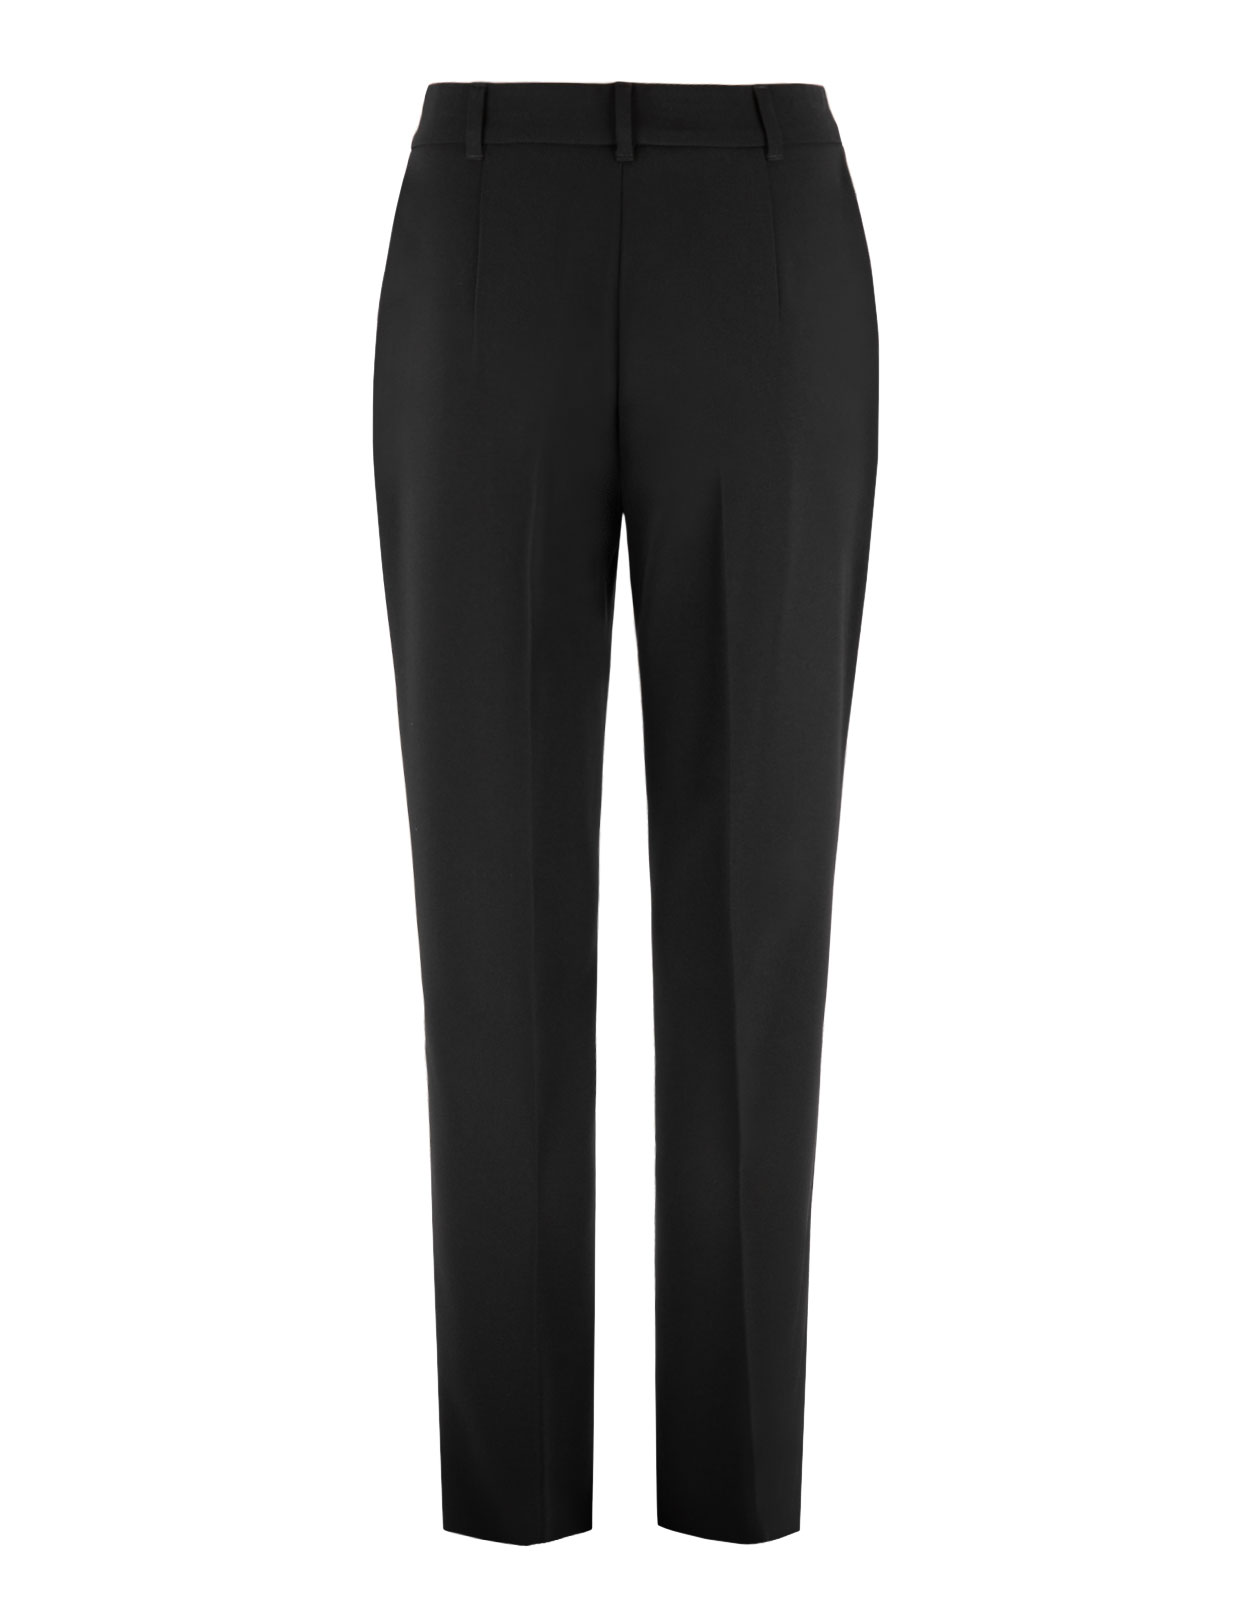 Manager Trousers Black